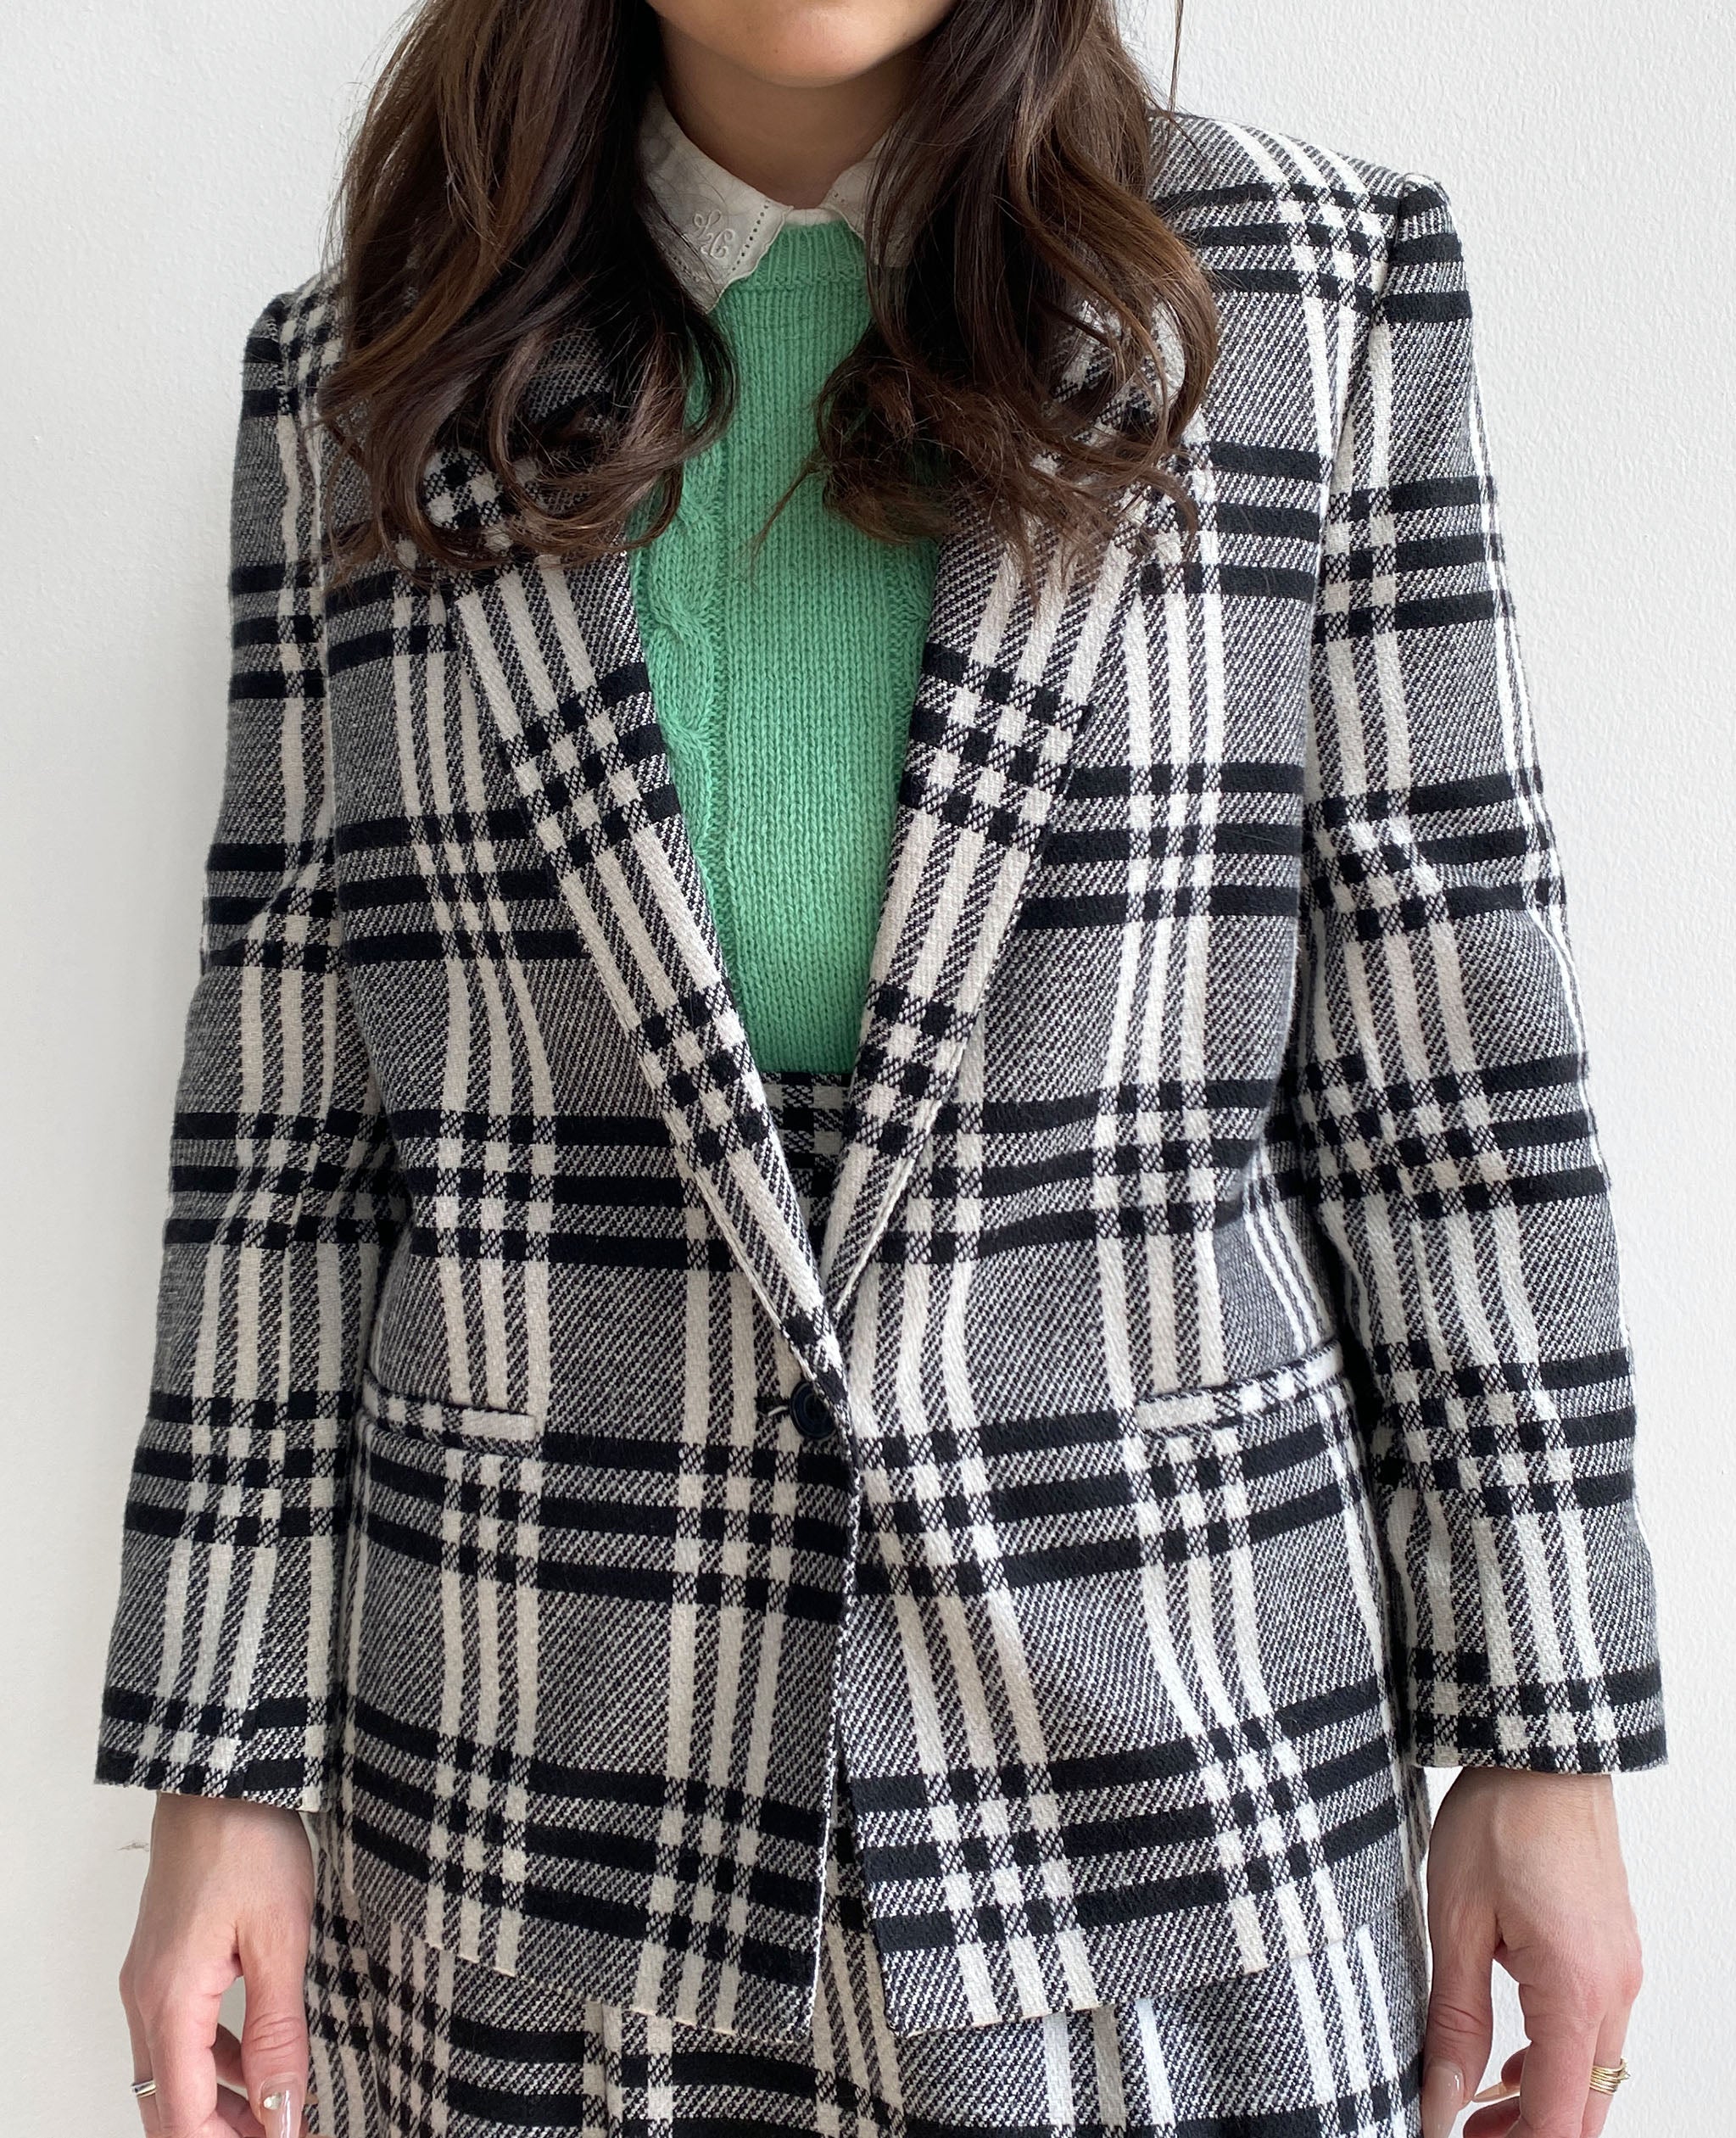 Black and White Checkered Skirt Suit